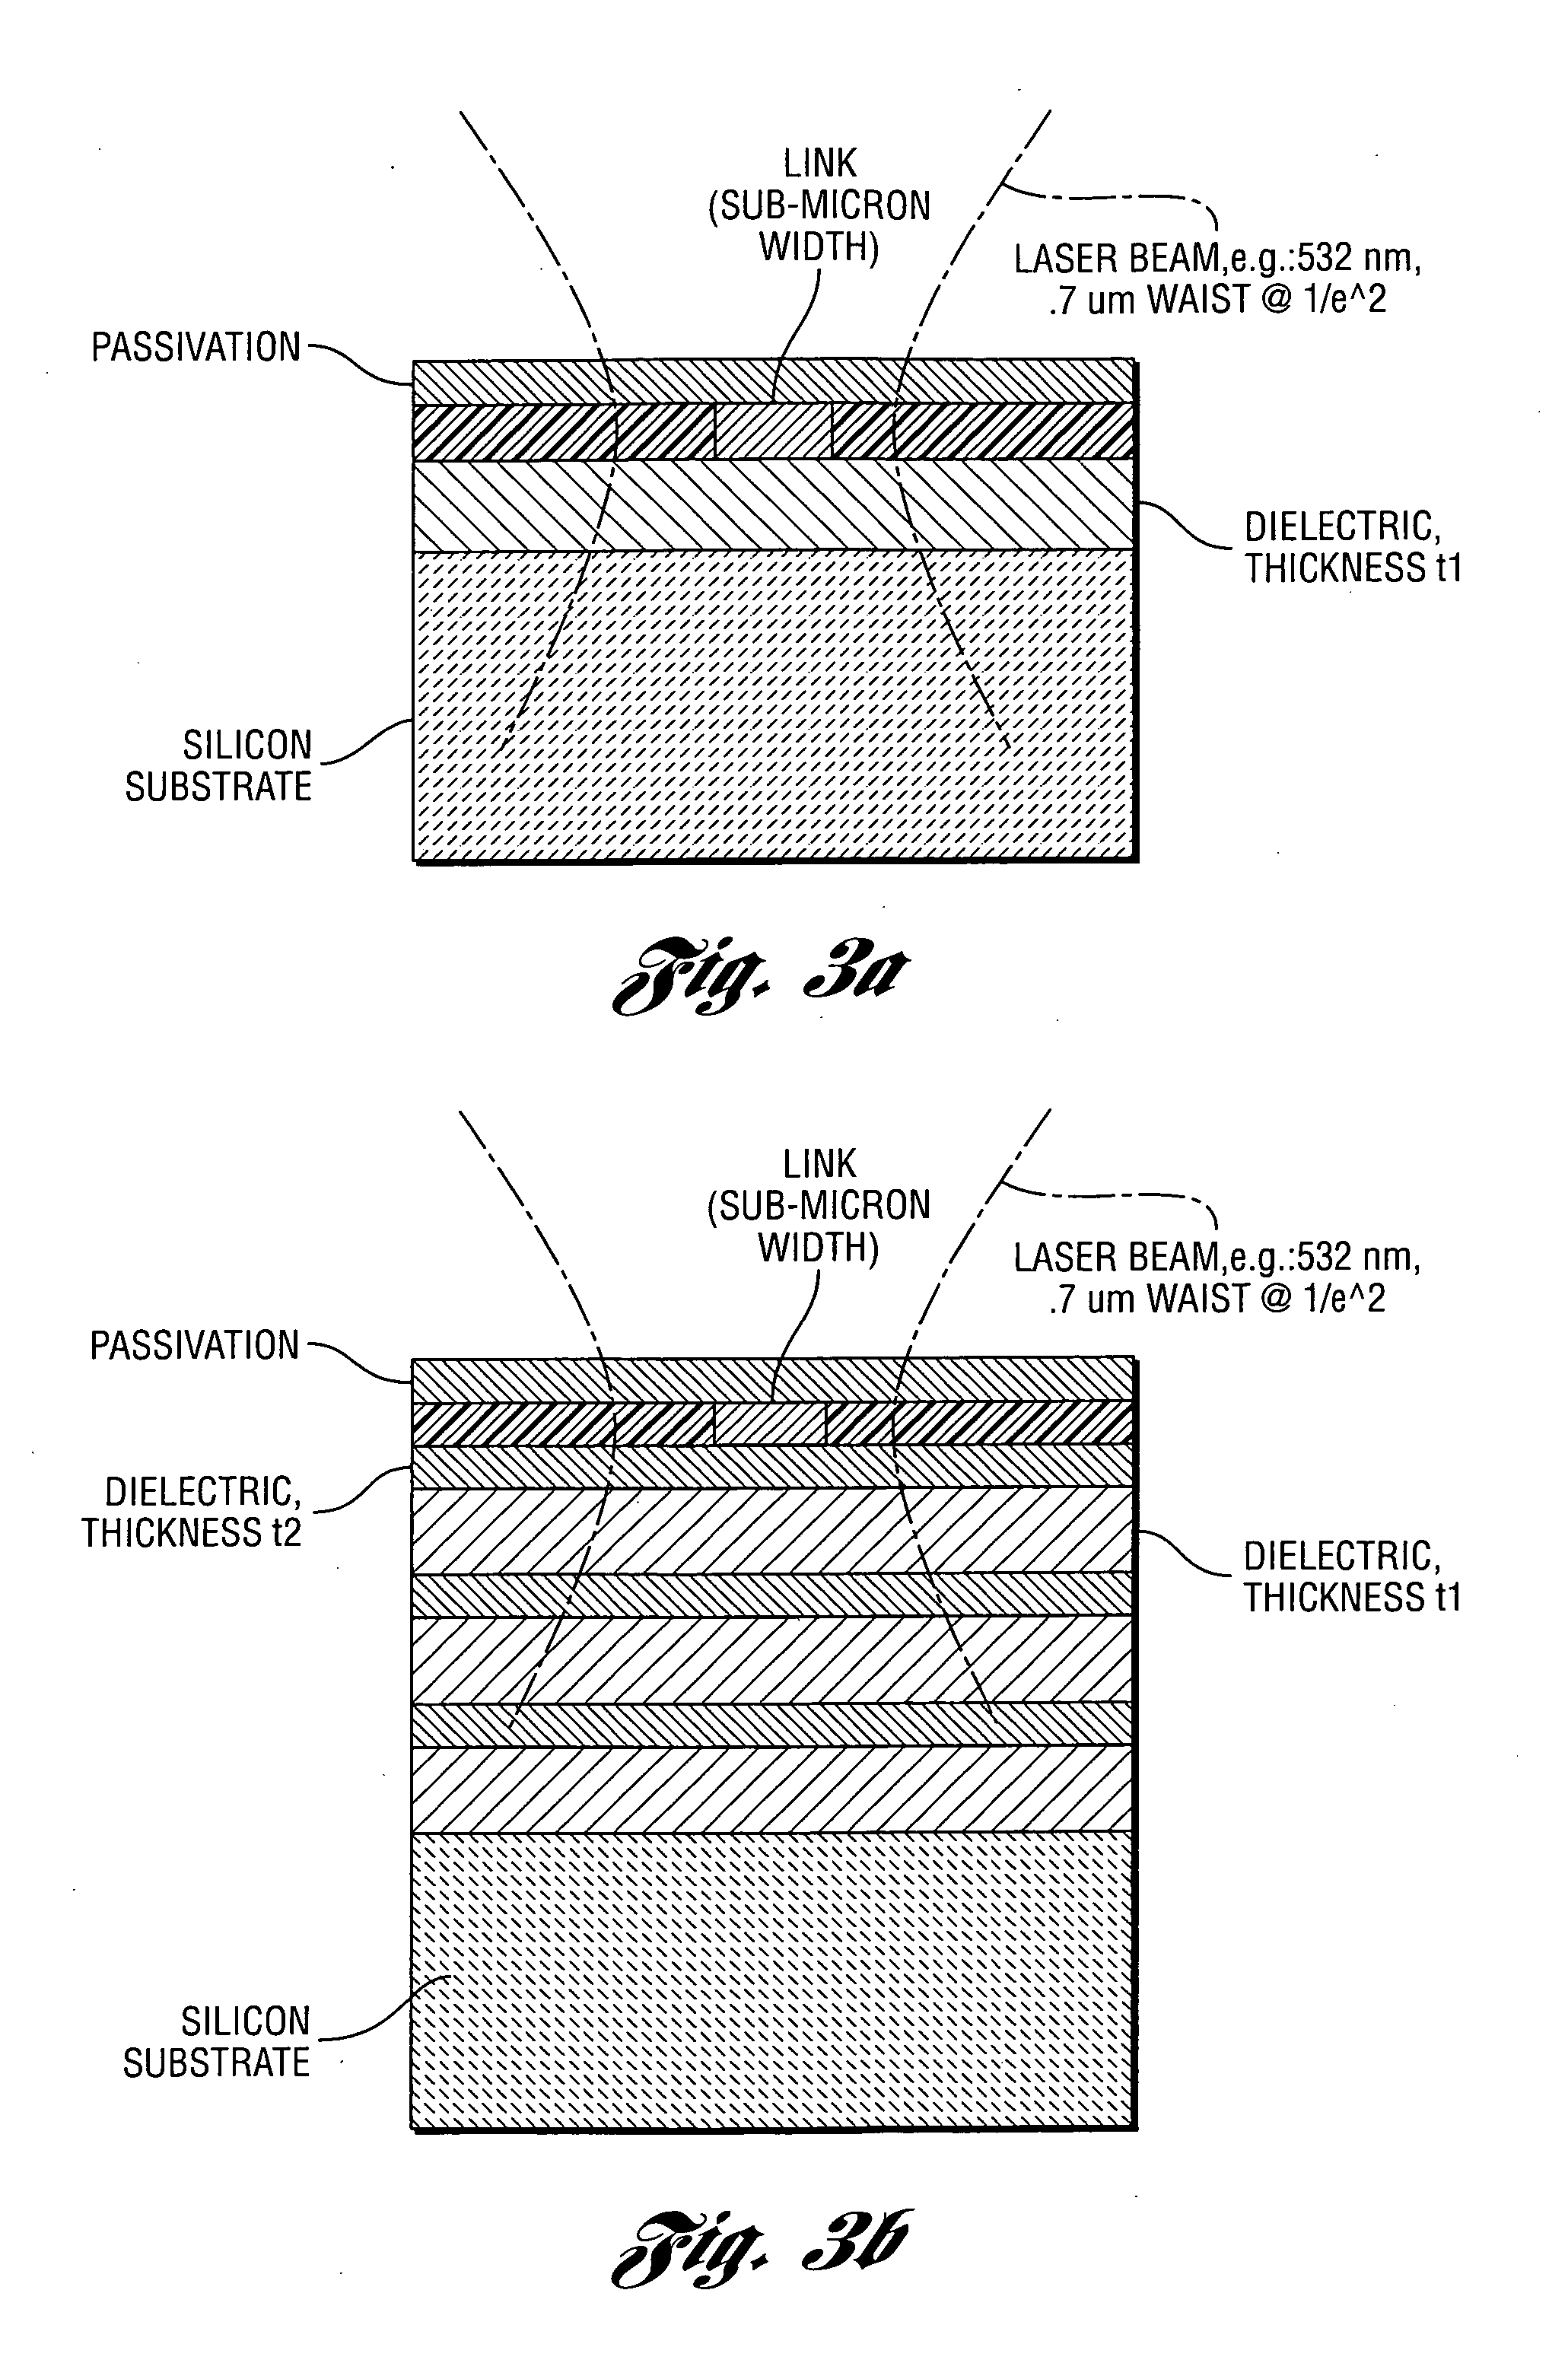 Laser-based method and system for processing a multi-material device having conductive link structures